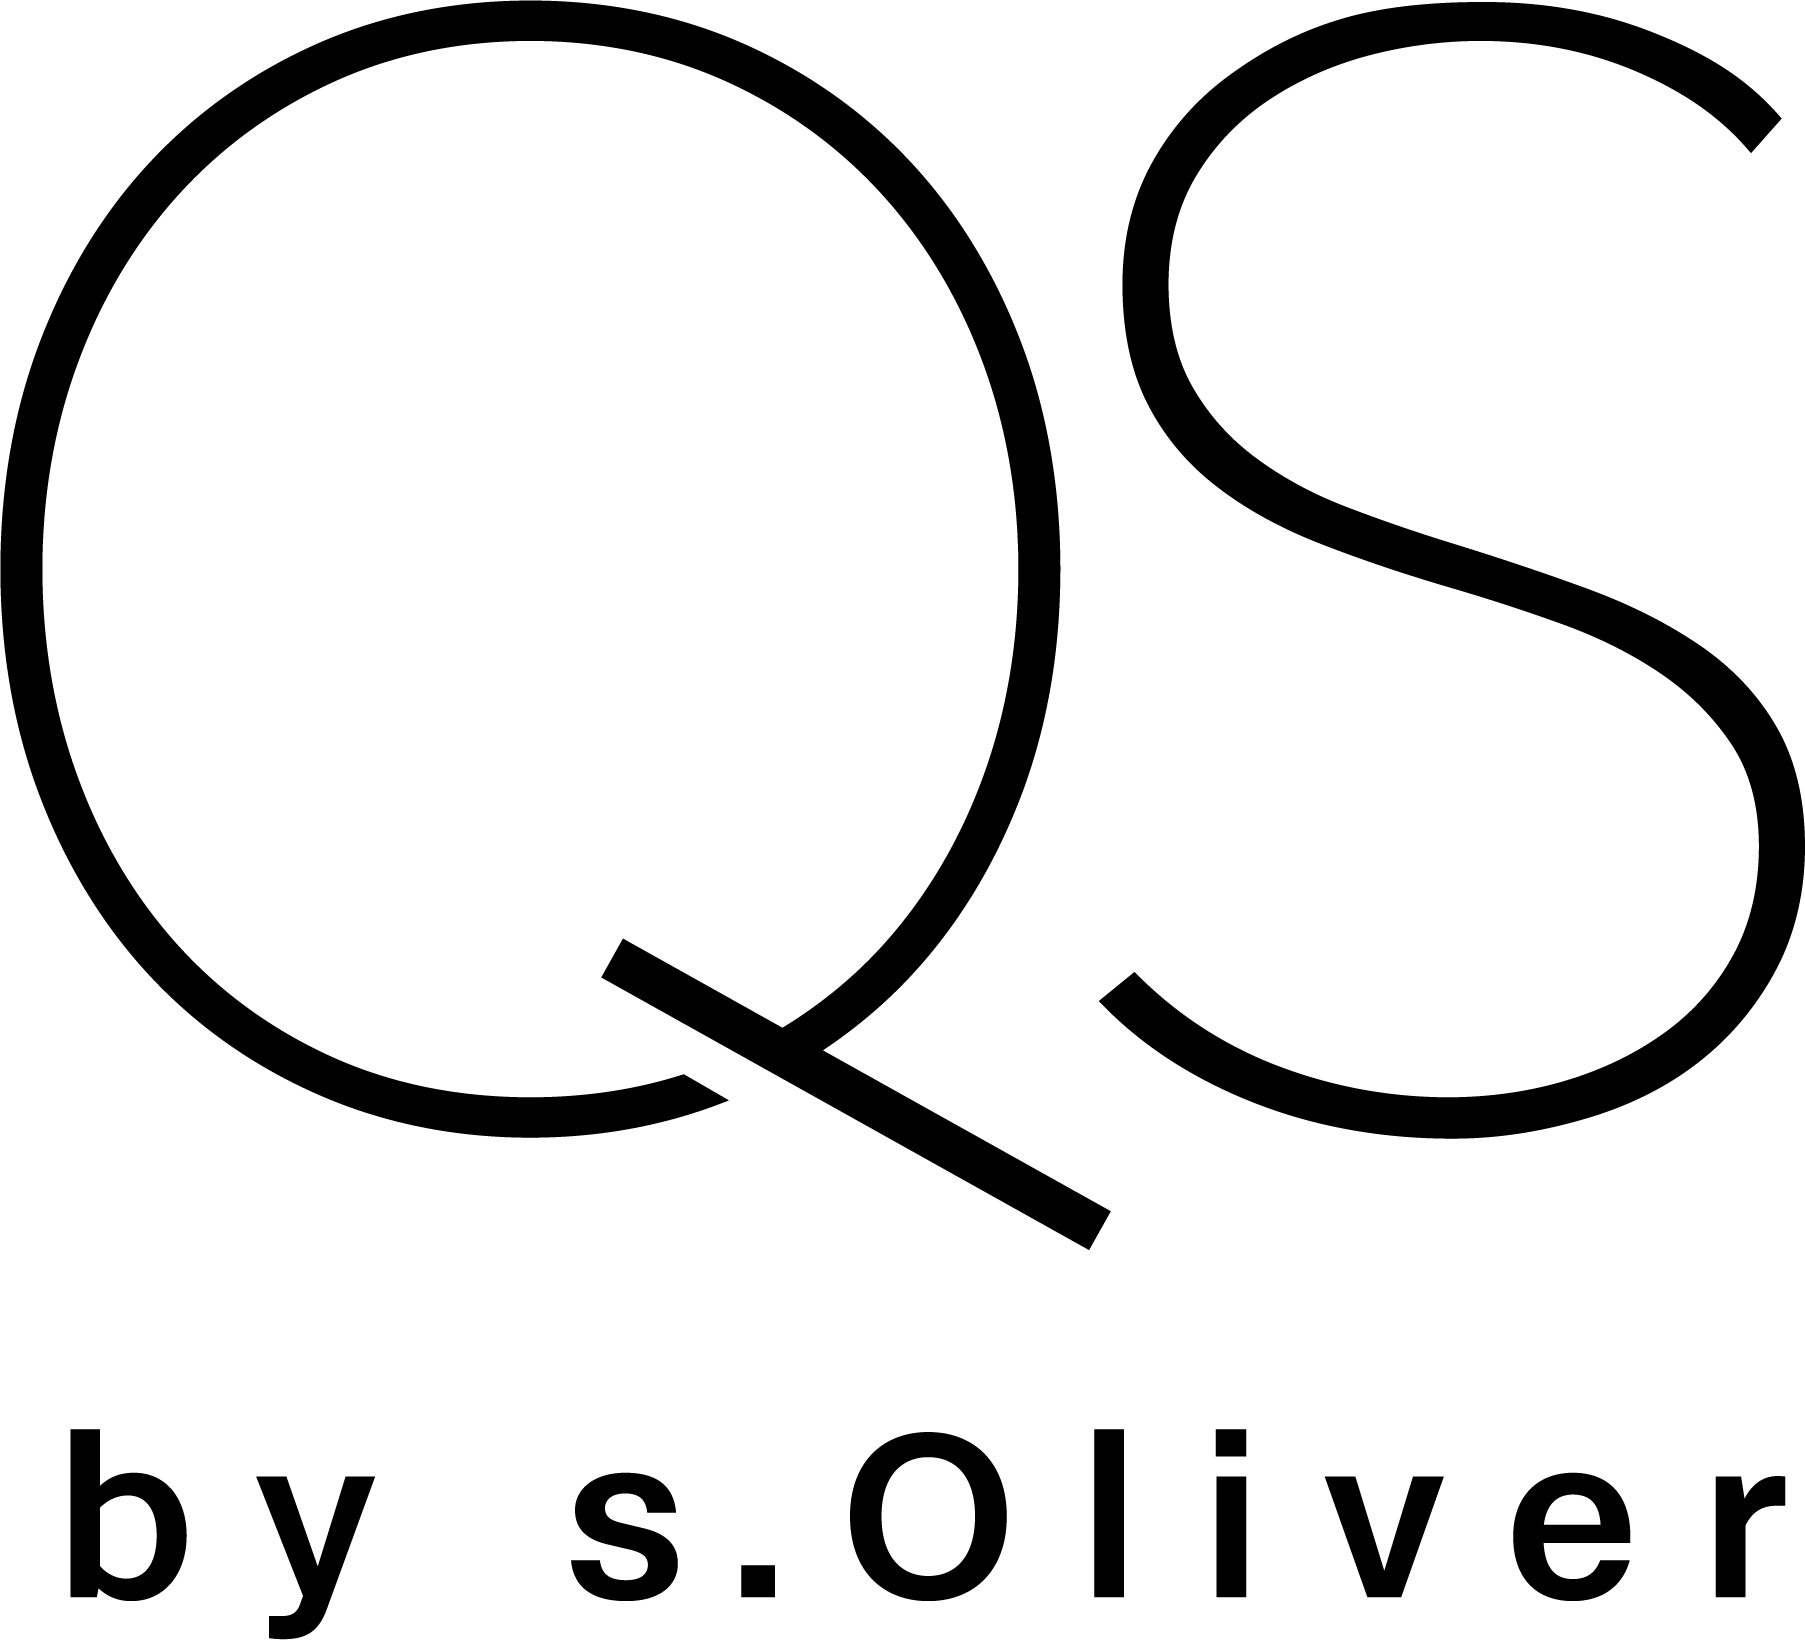 QS by s.Oliver